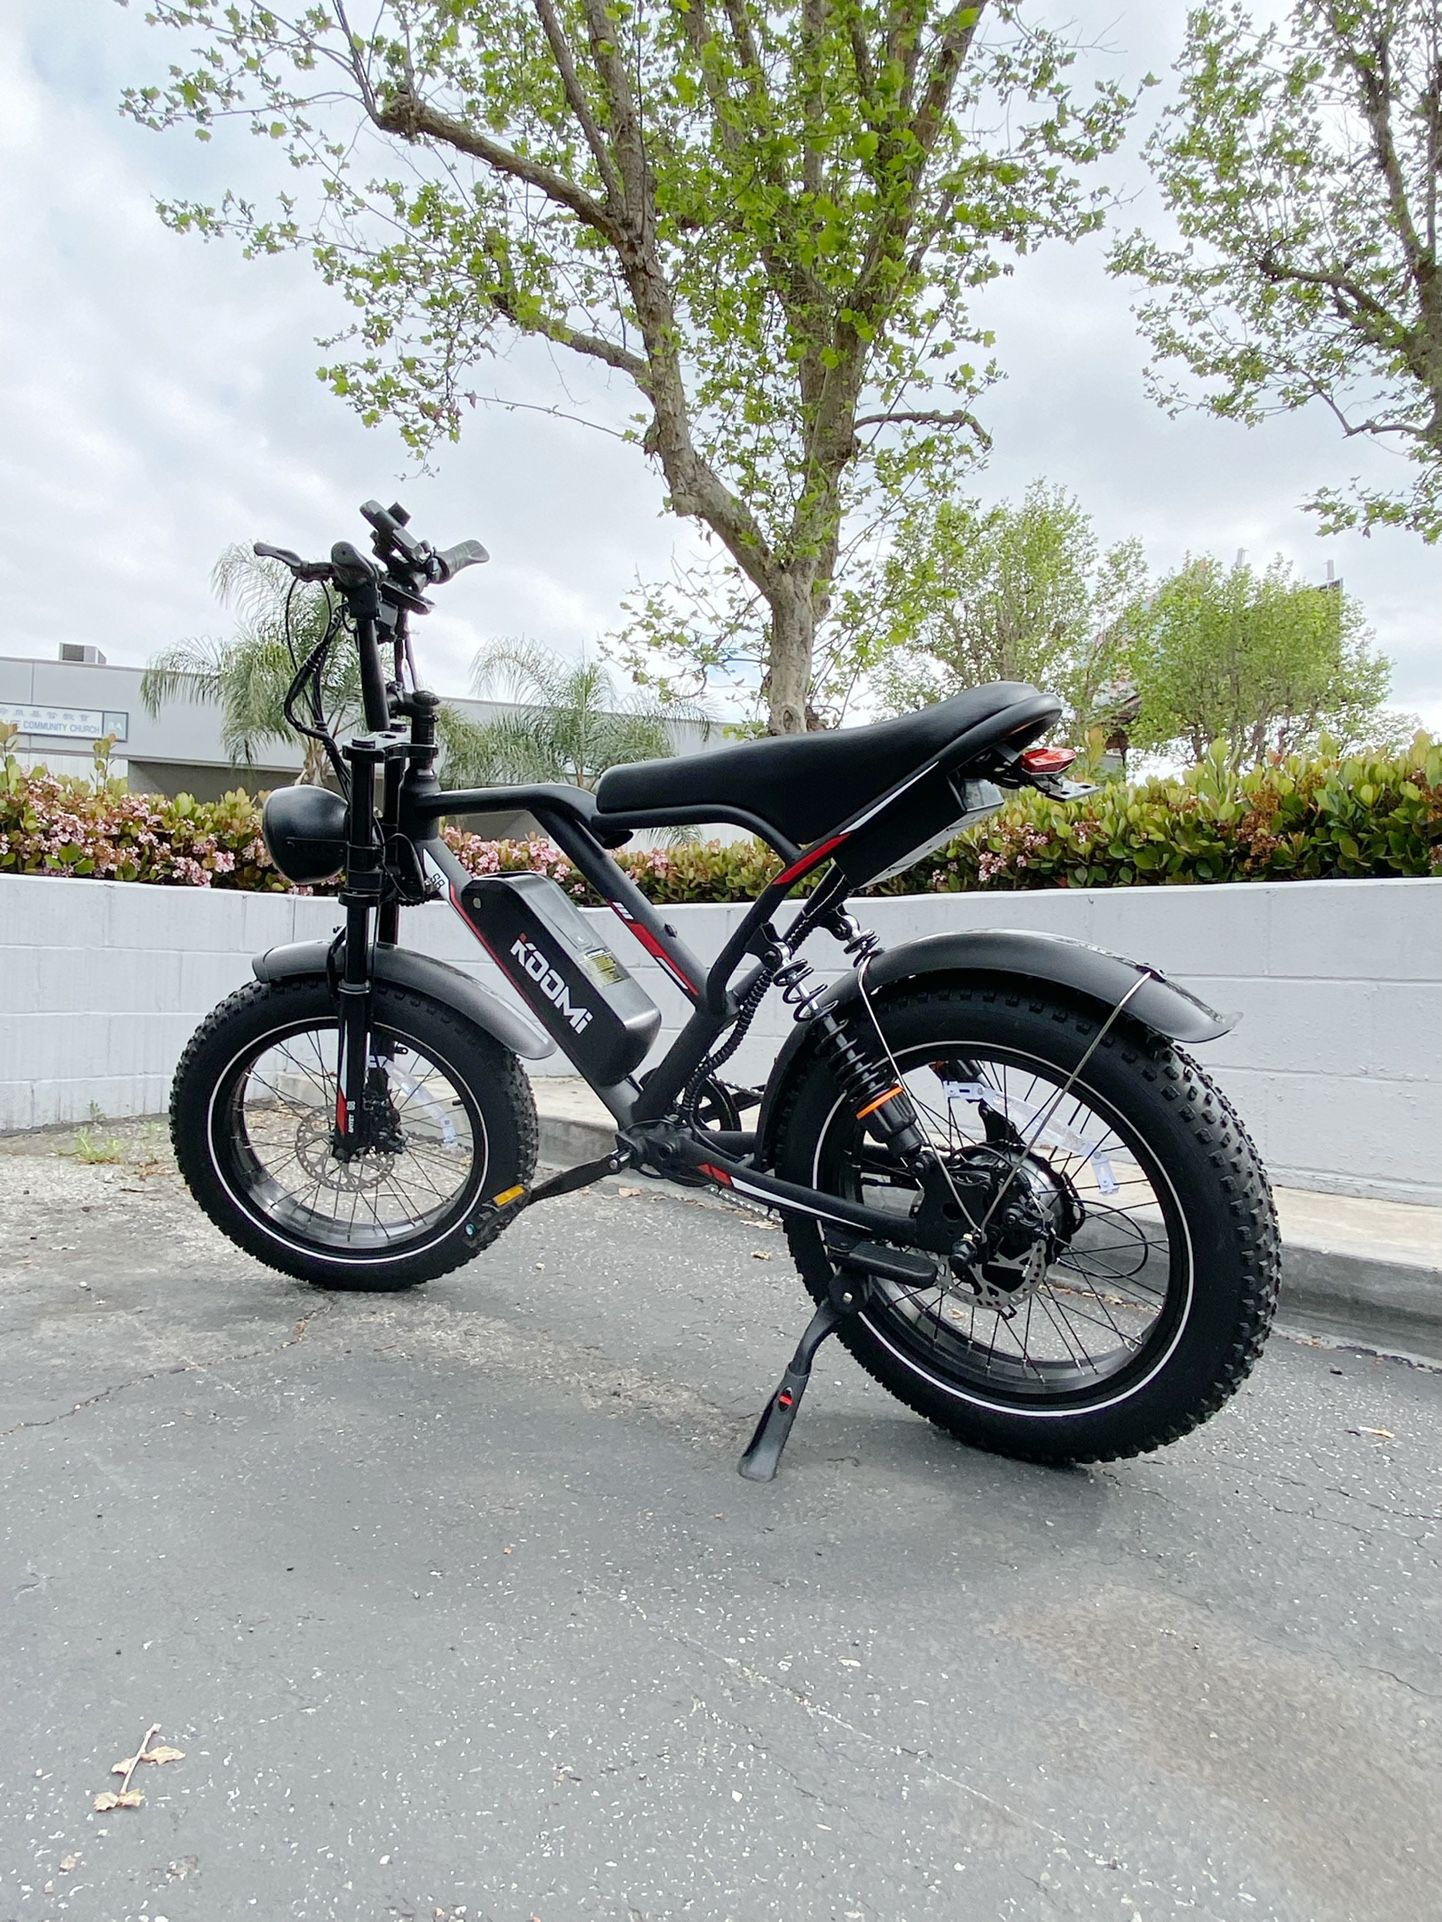 Brand new in box, e-bike 750w 48v 17.5ah, top speed 28 mph. Full suspension, with chain lock, phone holder, foot pegs,  electric bike 